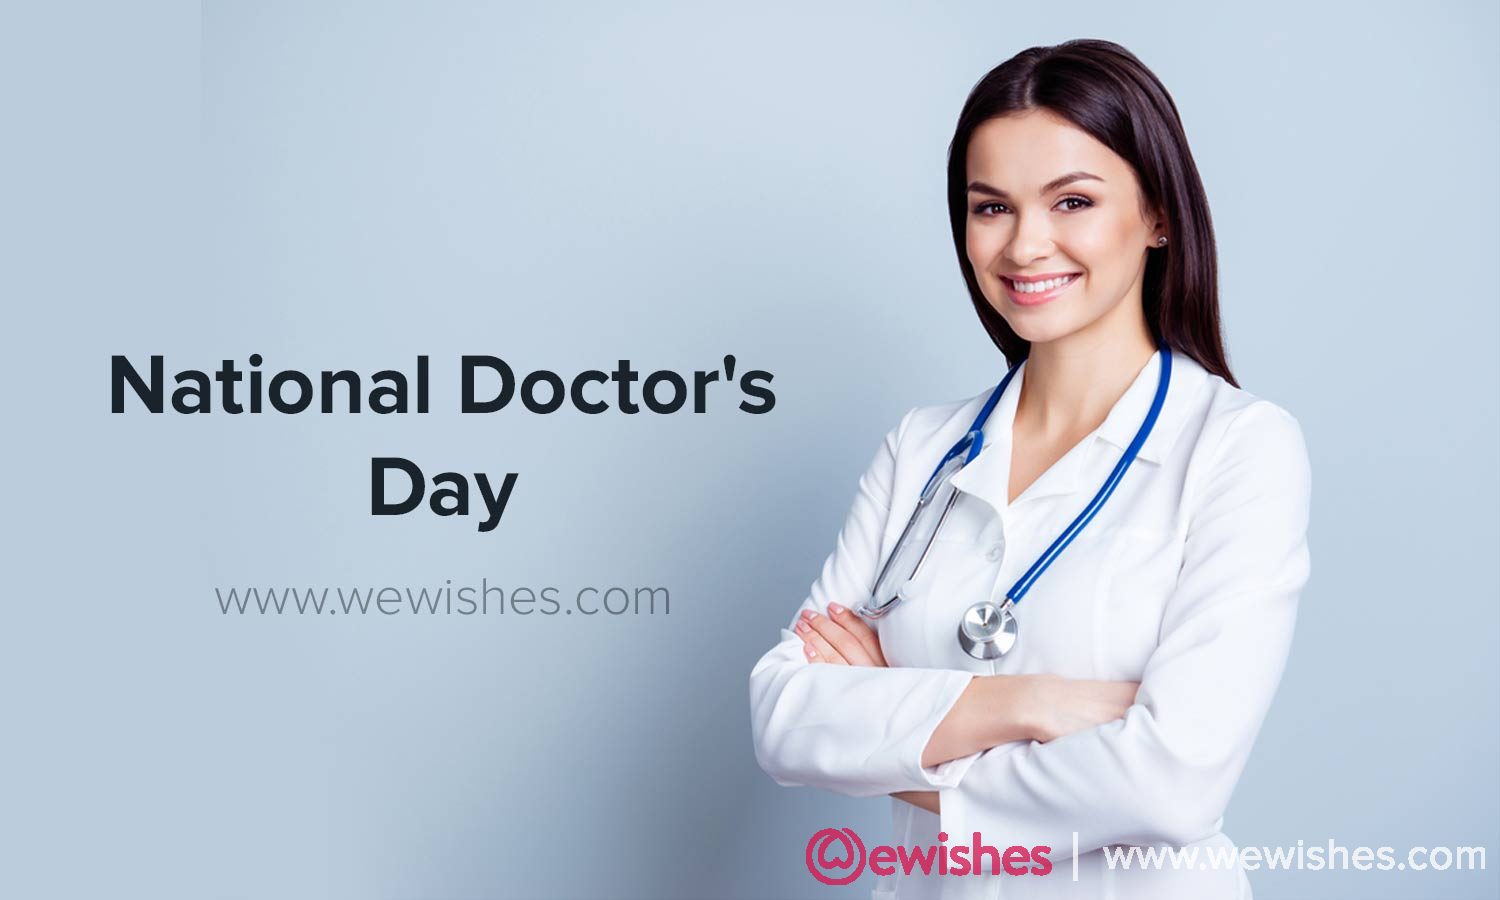 National Doctor's Day 2021: Quotes, Facts, Wishes to Share With Your Doctors